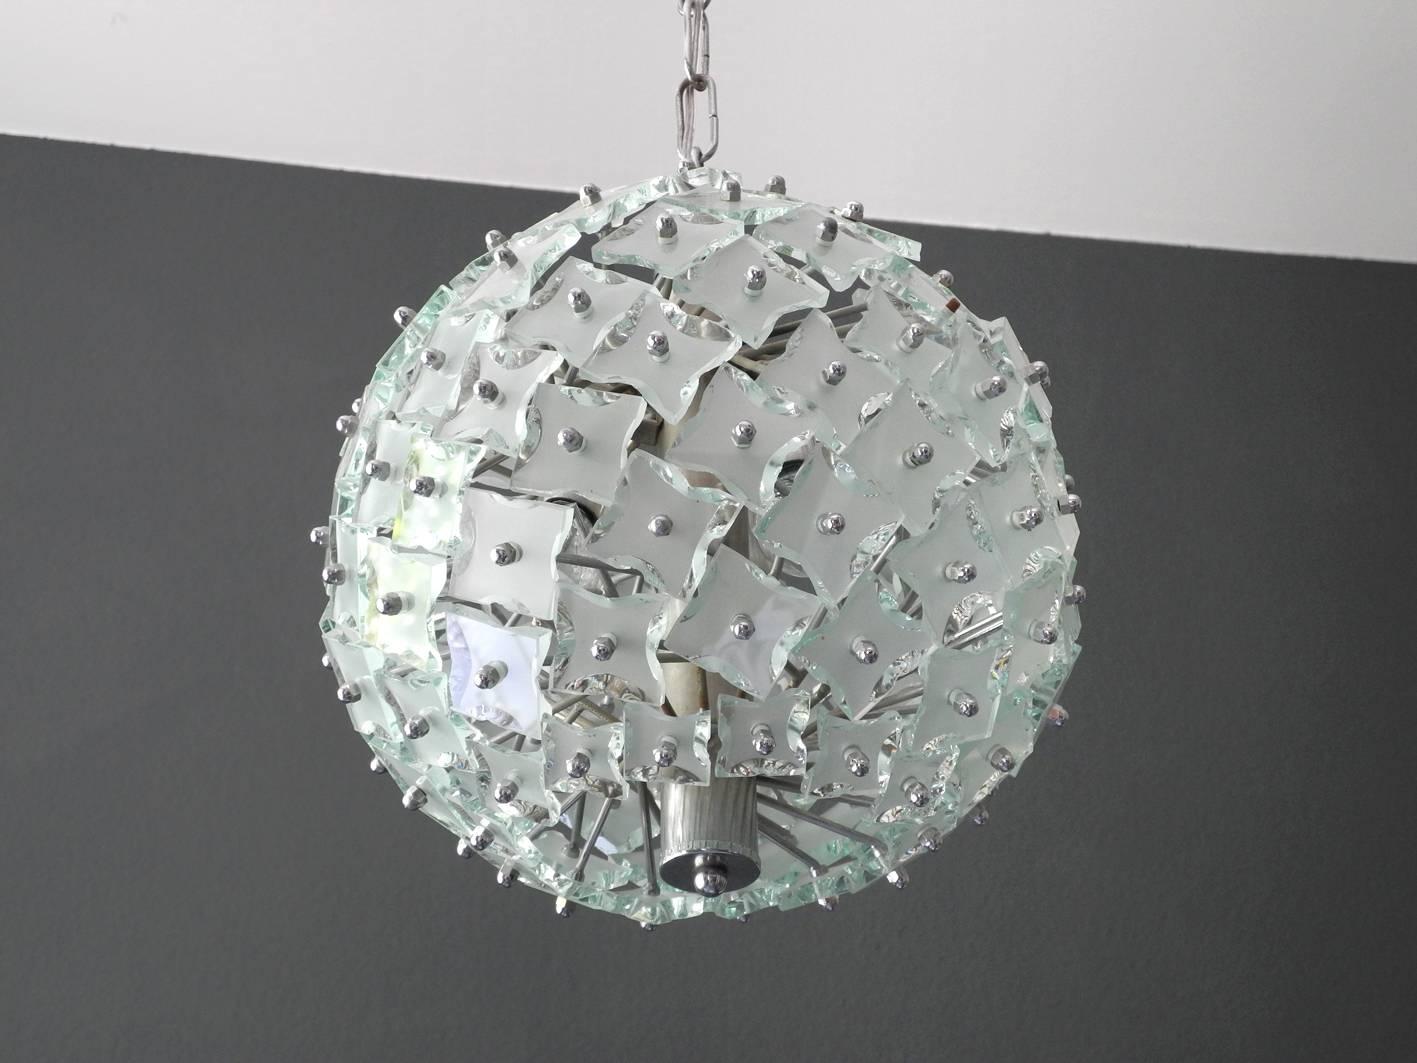 1960s Fontana Arte Glass Plates Pendant Lamp with an Elaborate Metal In Good Condition For Sale In München, DE